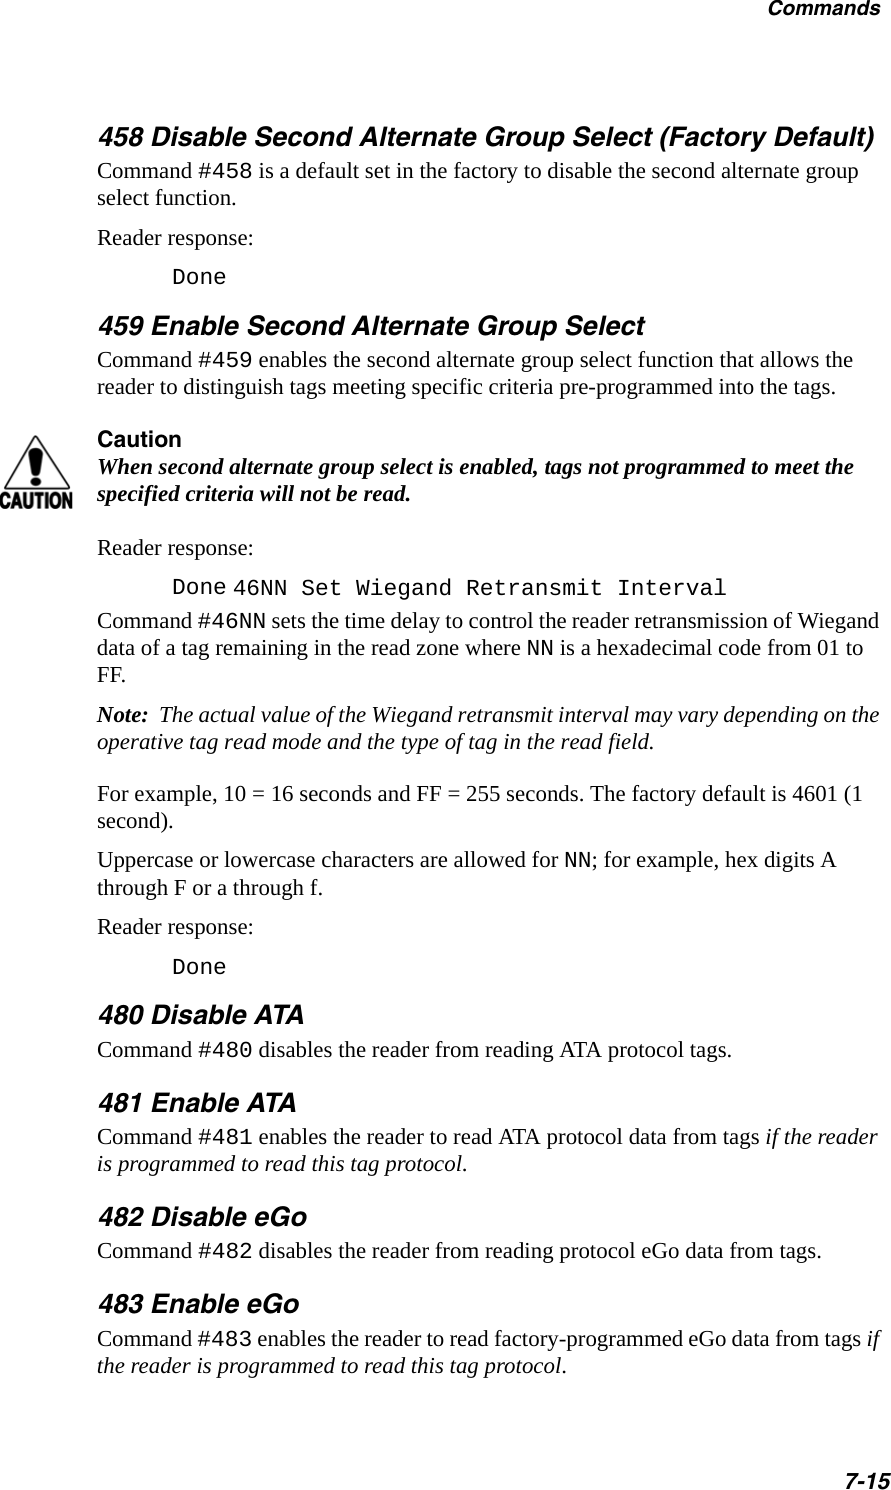 Commands7-15458 Disable Second Alternate Group Select (Factory Default)Command #458 is a default set in the factory to disable the second alternate group select function.Reader response:Done459 Enable Second Alternate Group SelectCommand #459 enables the second alternate group select function that allows the reader to distinguish tags meeting specific criteria pre-programmed into the tags. CautionWhen second alternate group select is enabled, tags not programmed to meet the specified criteria will not be read.Reader response:Done 46NN Set Wiegand Retransmit IntervalCommand #46NN sets the time delay to control the reader retransmission of Wiegand data of a tag remaining in the read zone where NN is a hexadecimal code from 01 to FF.Note:  The actual value of the Wiegand retransmit interval may vary depending on the operative tag read mode and the type of tag in the read field.For example, 10 = 16 seconds and FF = 255 seconds. The factory default is 4601 (1 second).Uppercase or lowercase characters are allowed for NN; for example, hex digits A through F or a through f. Reader response:Done 480 Disable ATACommand #480 disables the reader from reading ATA protocol tags.481 Enable ATACommand #481 enables the reader to read ATA protocol data from tags if the reader is programmed to read this tag protocol.482 Disable eGoCommand #482 disables the reader from reading protocol eGo data from tags.483 Enable eGoCommand #483 enables the reader to read factory-programmed eGo data from tags if the reader is programmed to read this tag protocol.